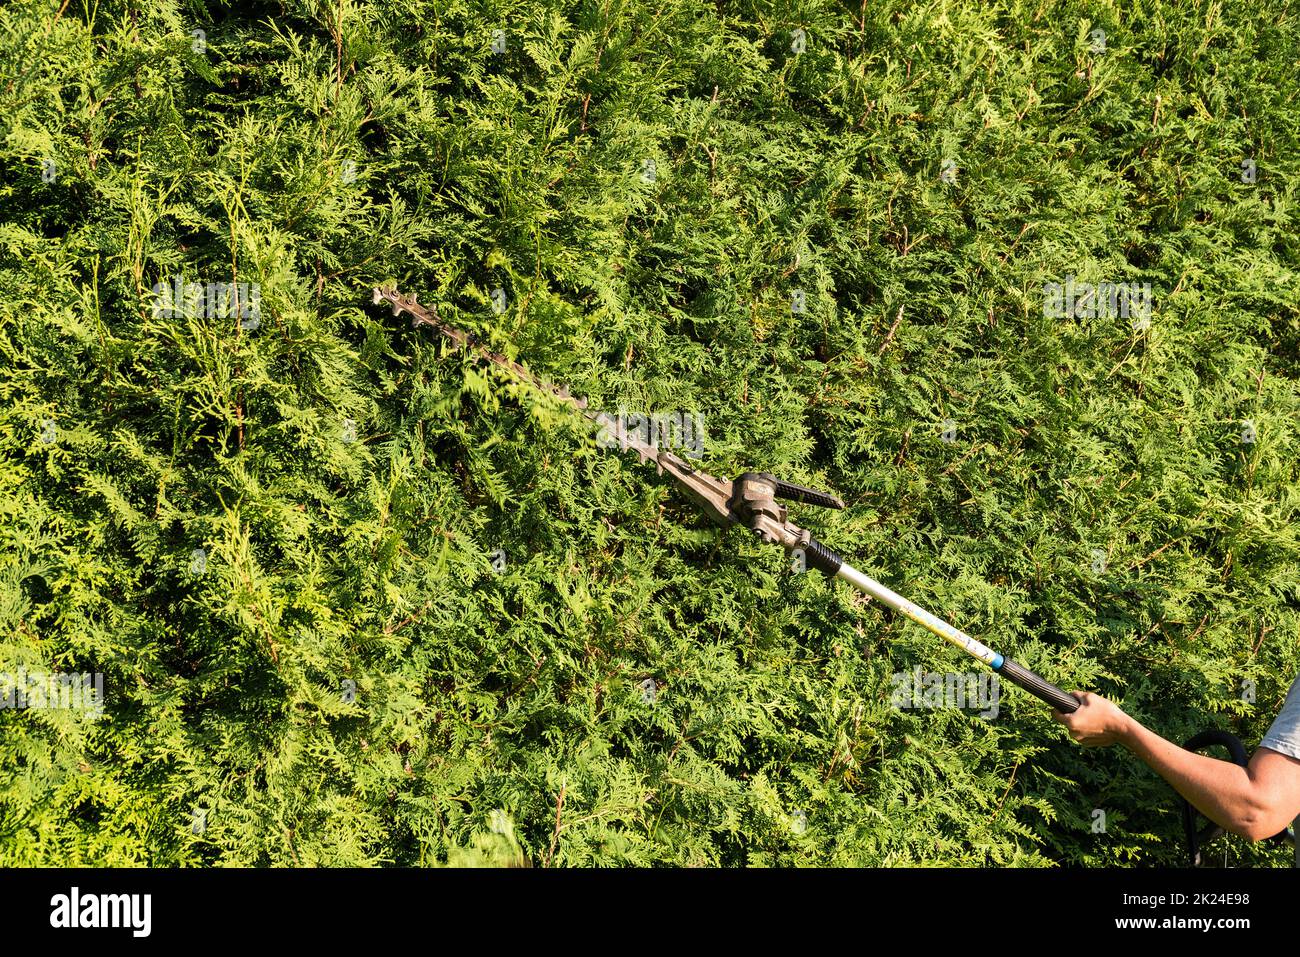 Landscape gardener cuts thuja hedge with hedge trimmer - detail Stock Photo